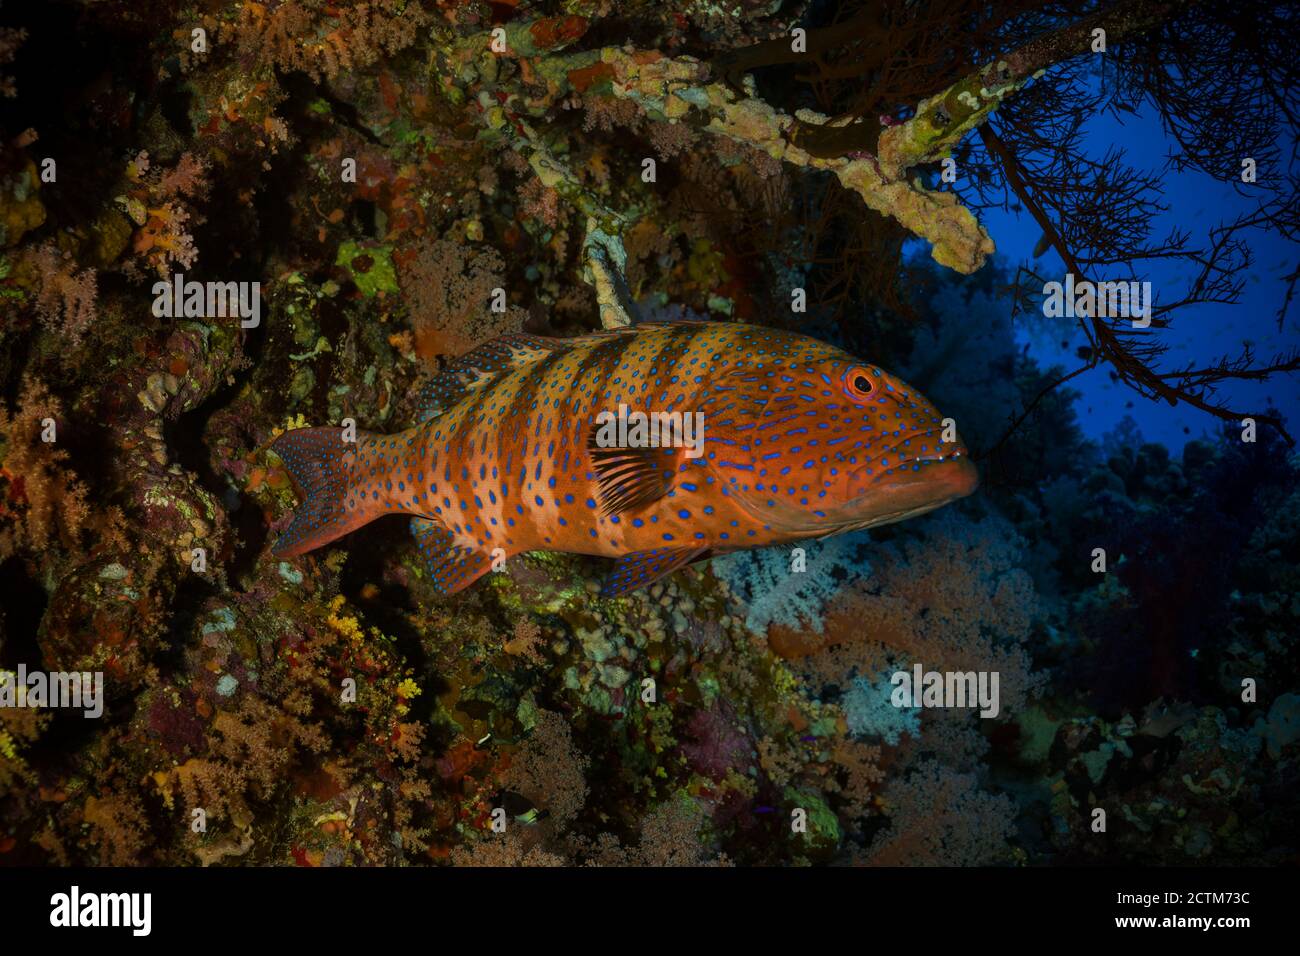 Colorful ocean life on a beautiful background Stock Photo